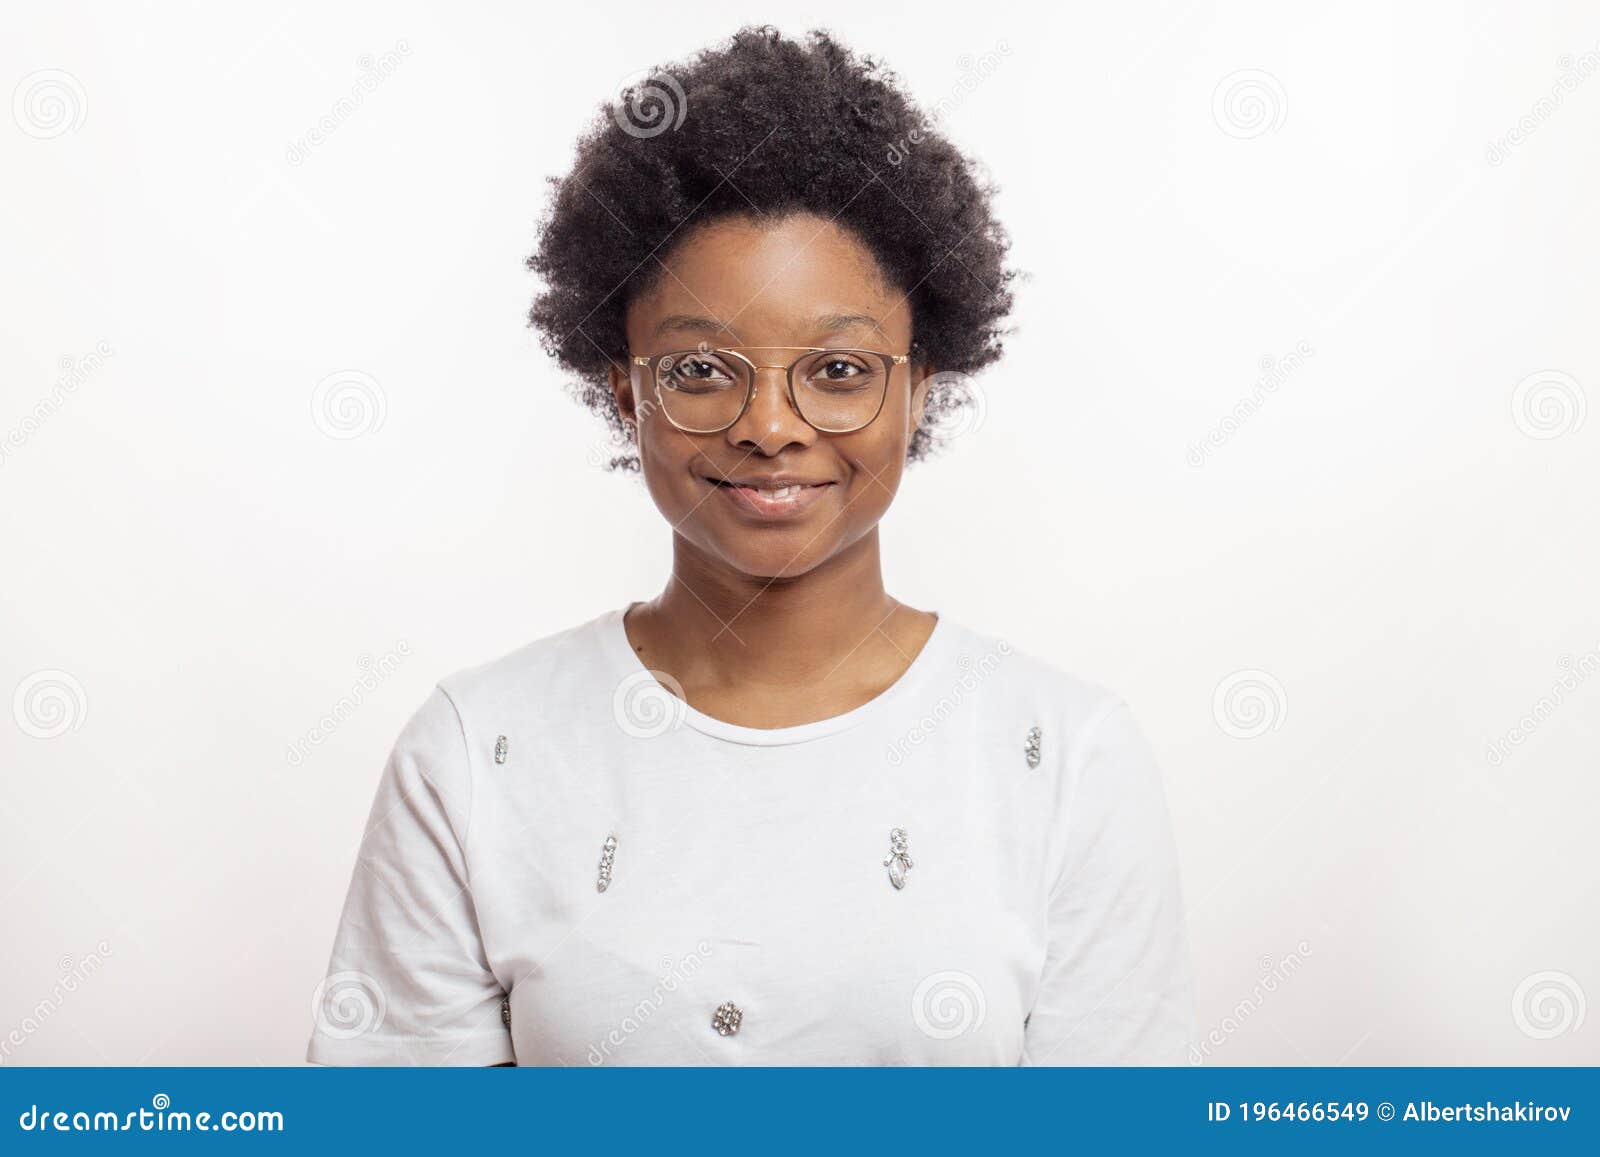 clever, cute africanamerican student with clin dark skin